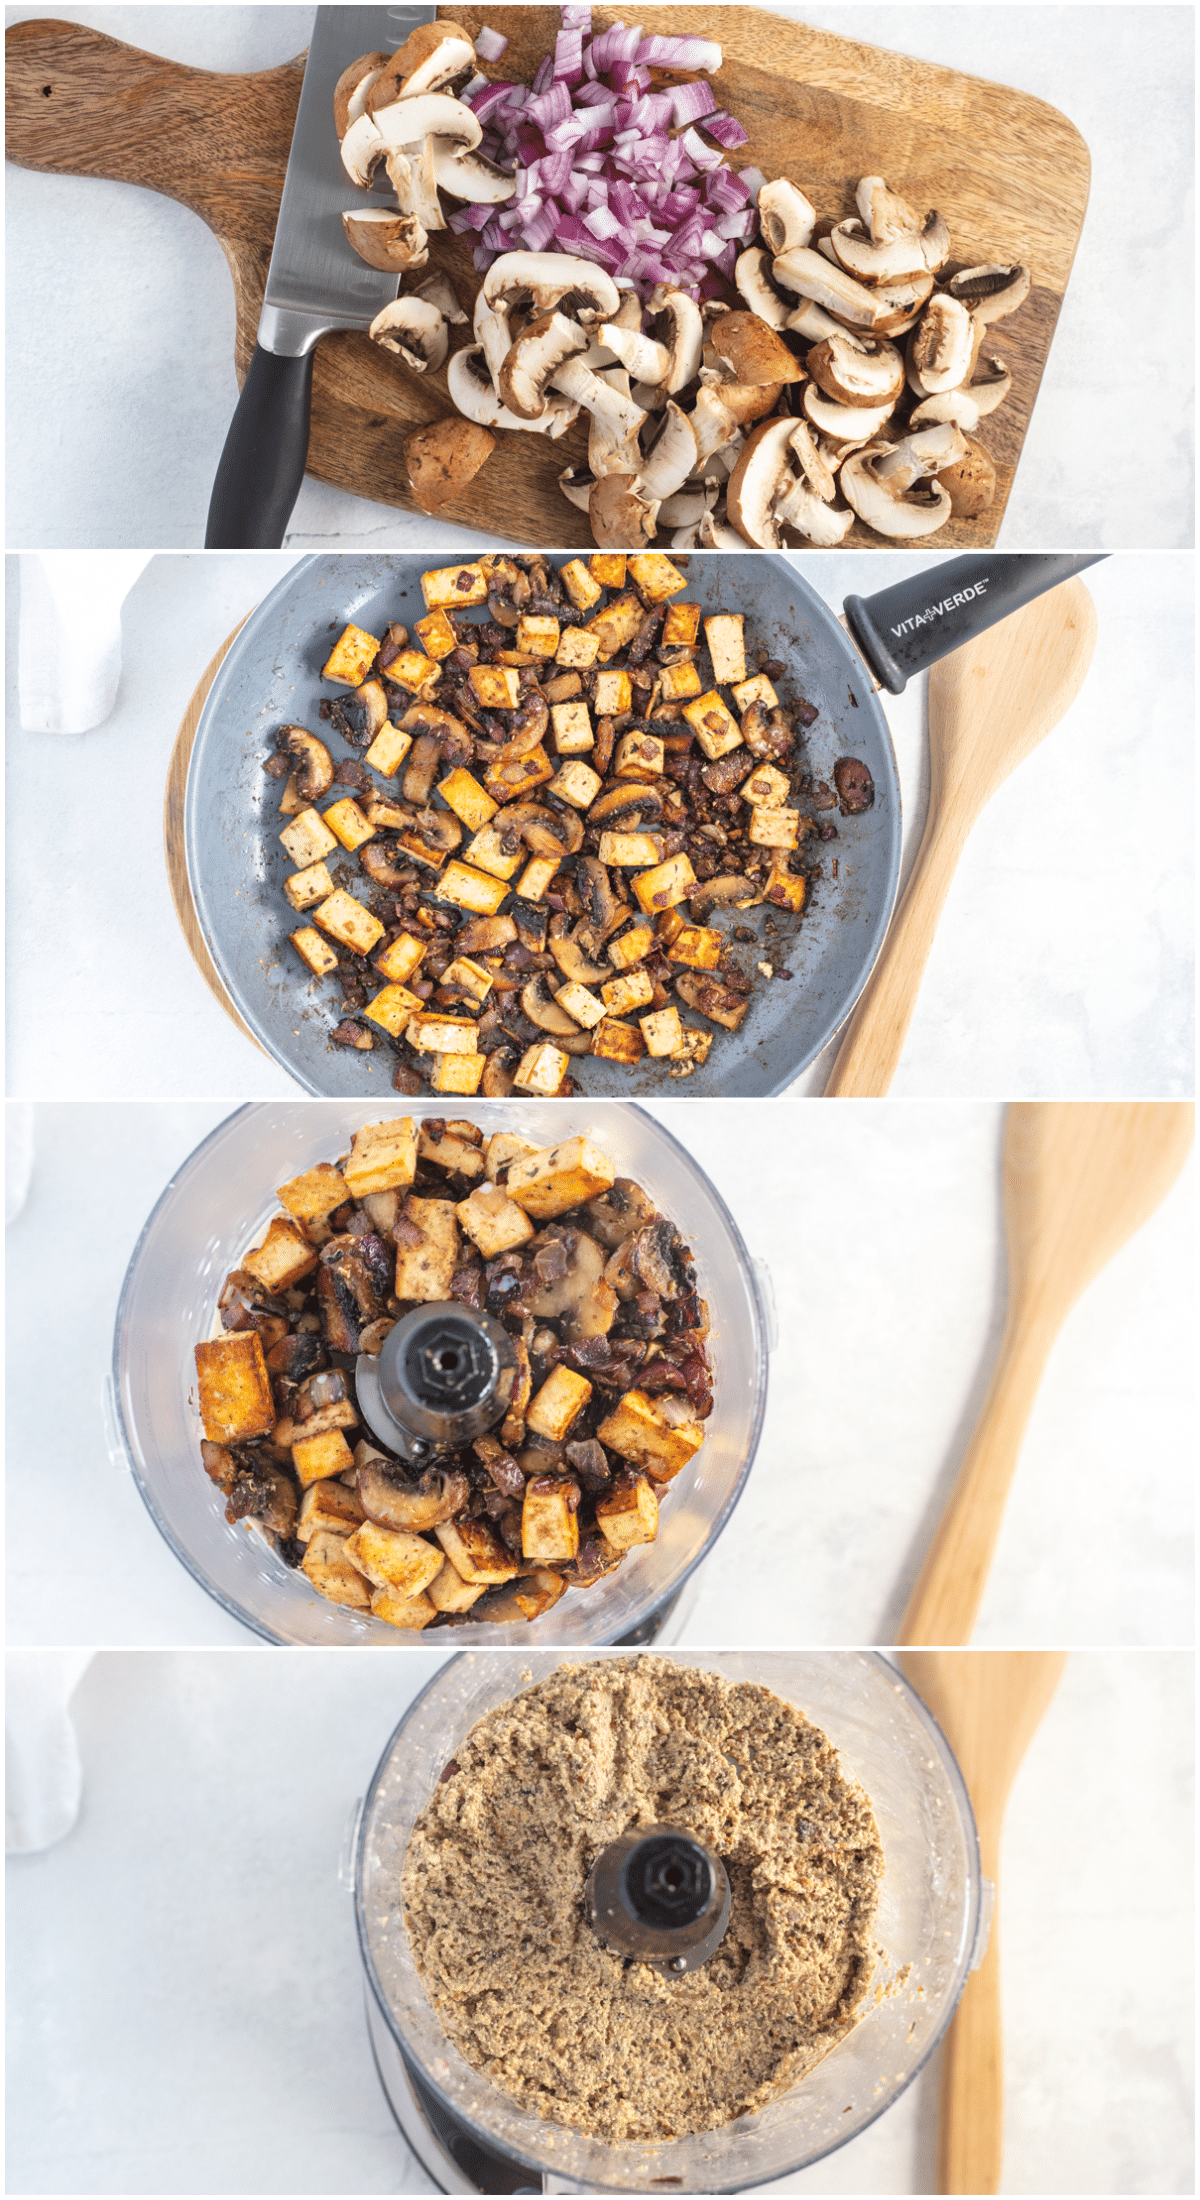 Four image collage showing how to make vegan pate: chop mushrooms, onion, and walnuts. Sauté and process or blend into a pate paste consistency.